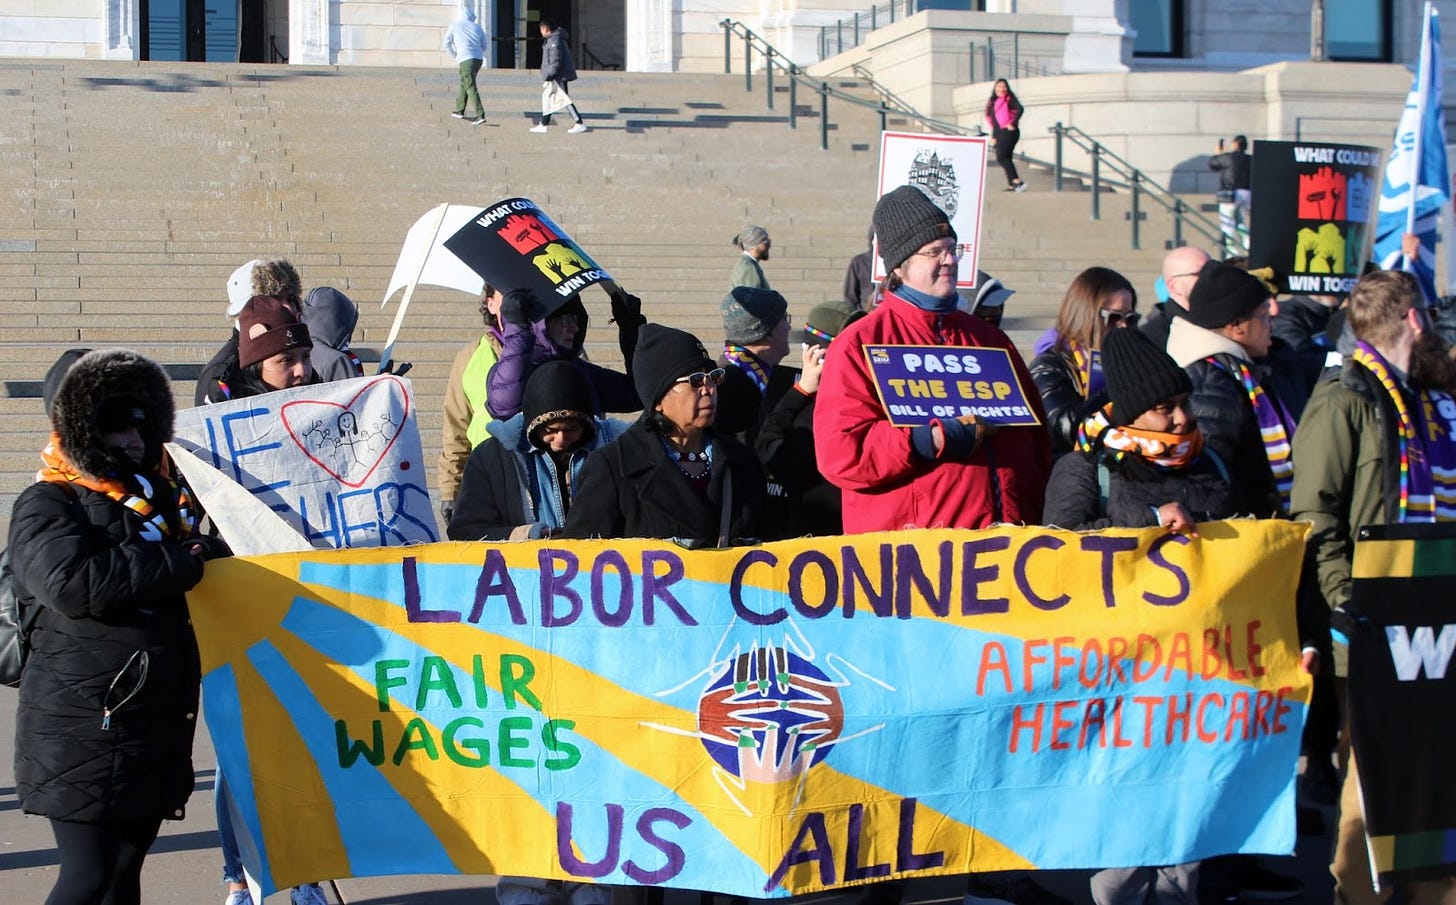 people standing with colorful signs and wearing winter attire hold a banner depicting a blue sky and yellow sun background behind text that reads "labor connects us all" "Fair wages" and. "affordable healthcare" with 4 hands reaching fingertips